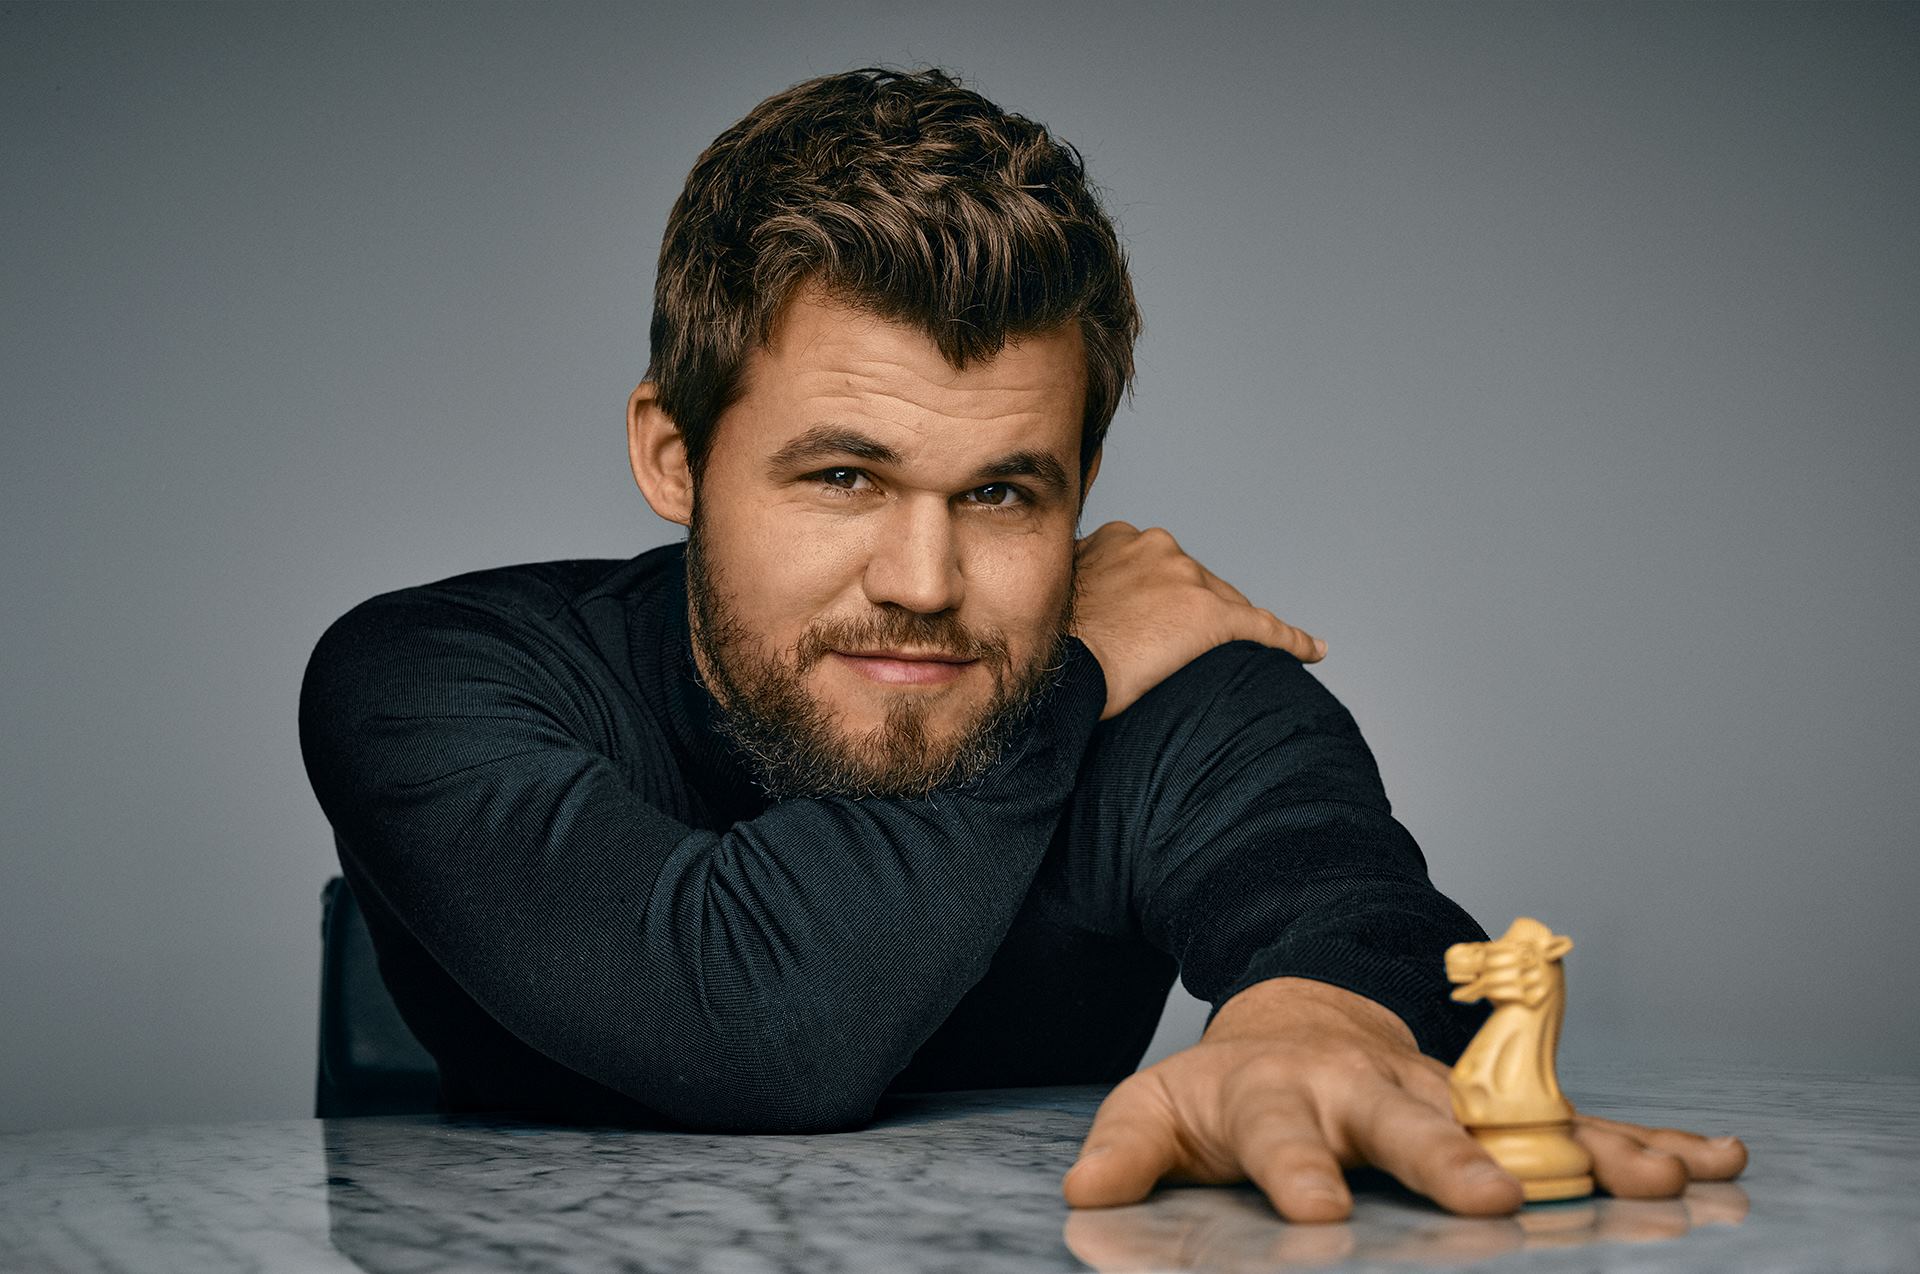 Discover the Surprising and Fascinating Truths About Magnus Carlsen: The  World's Greatest Chess Player